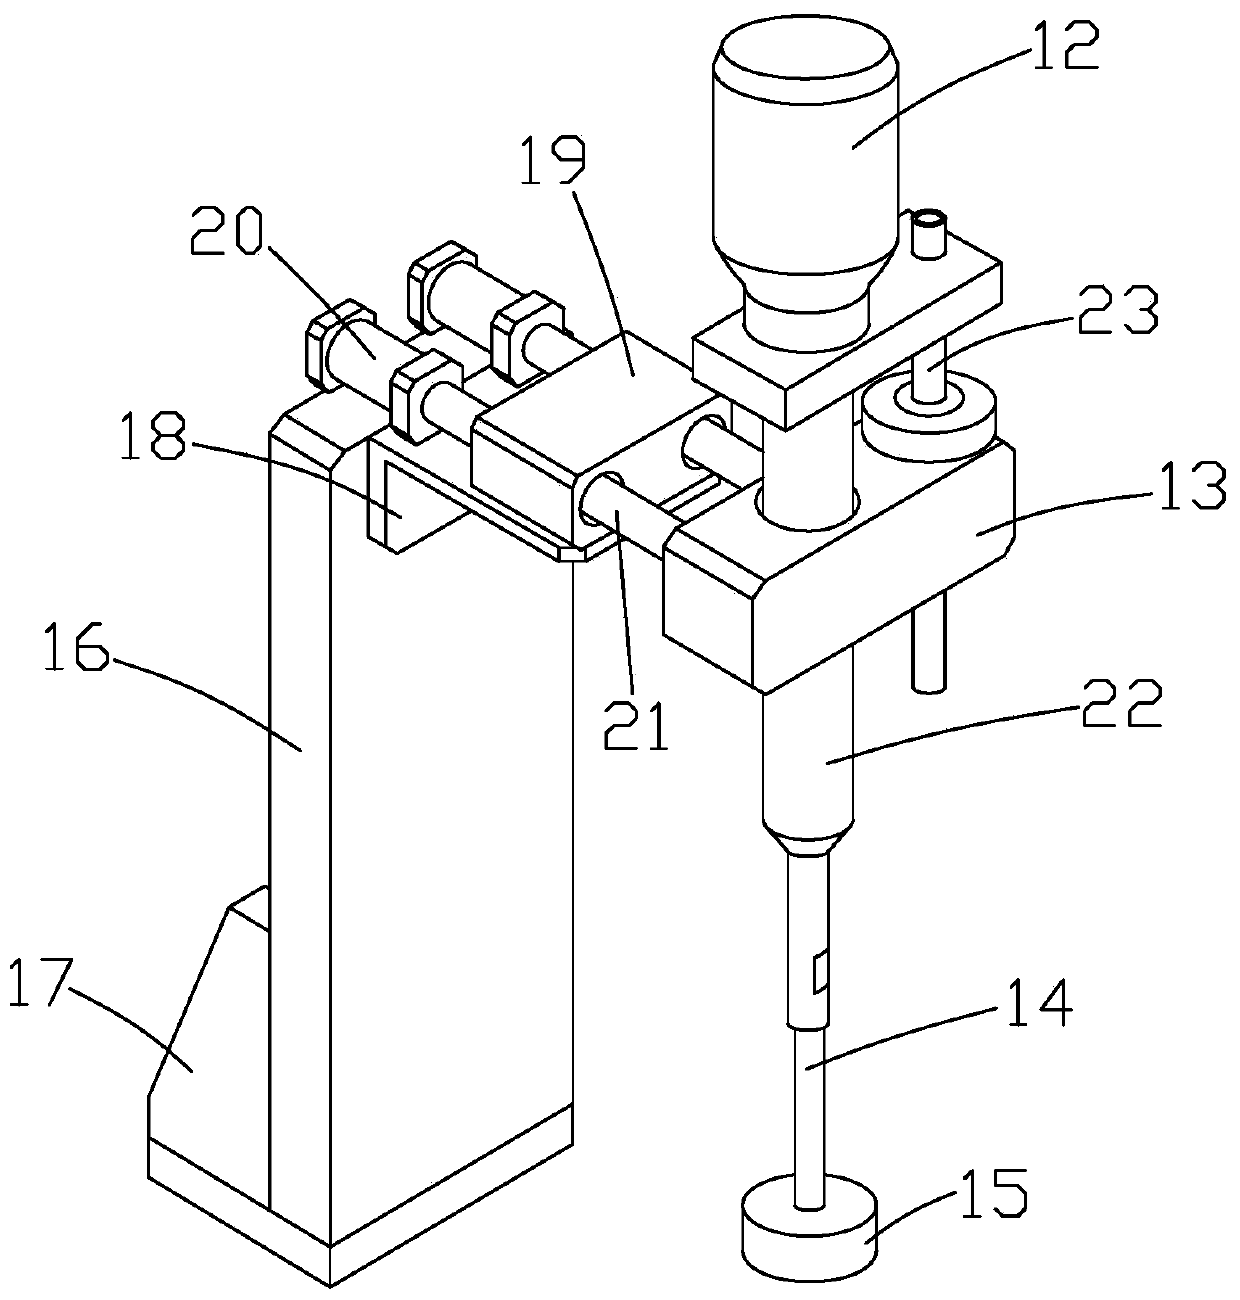 A polishing device for producing hardware accessories